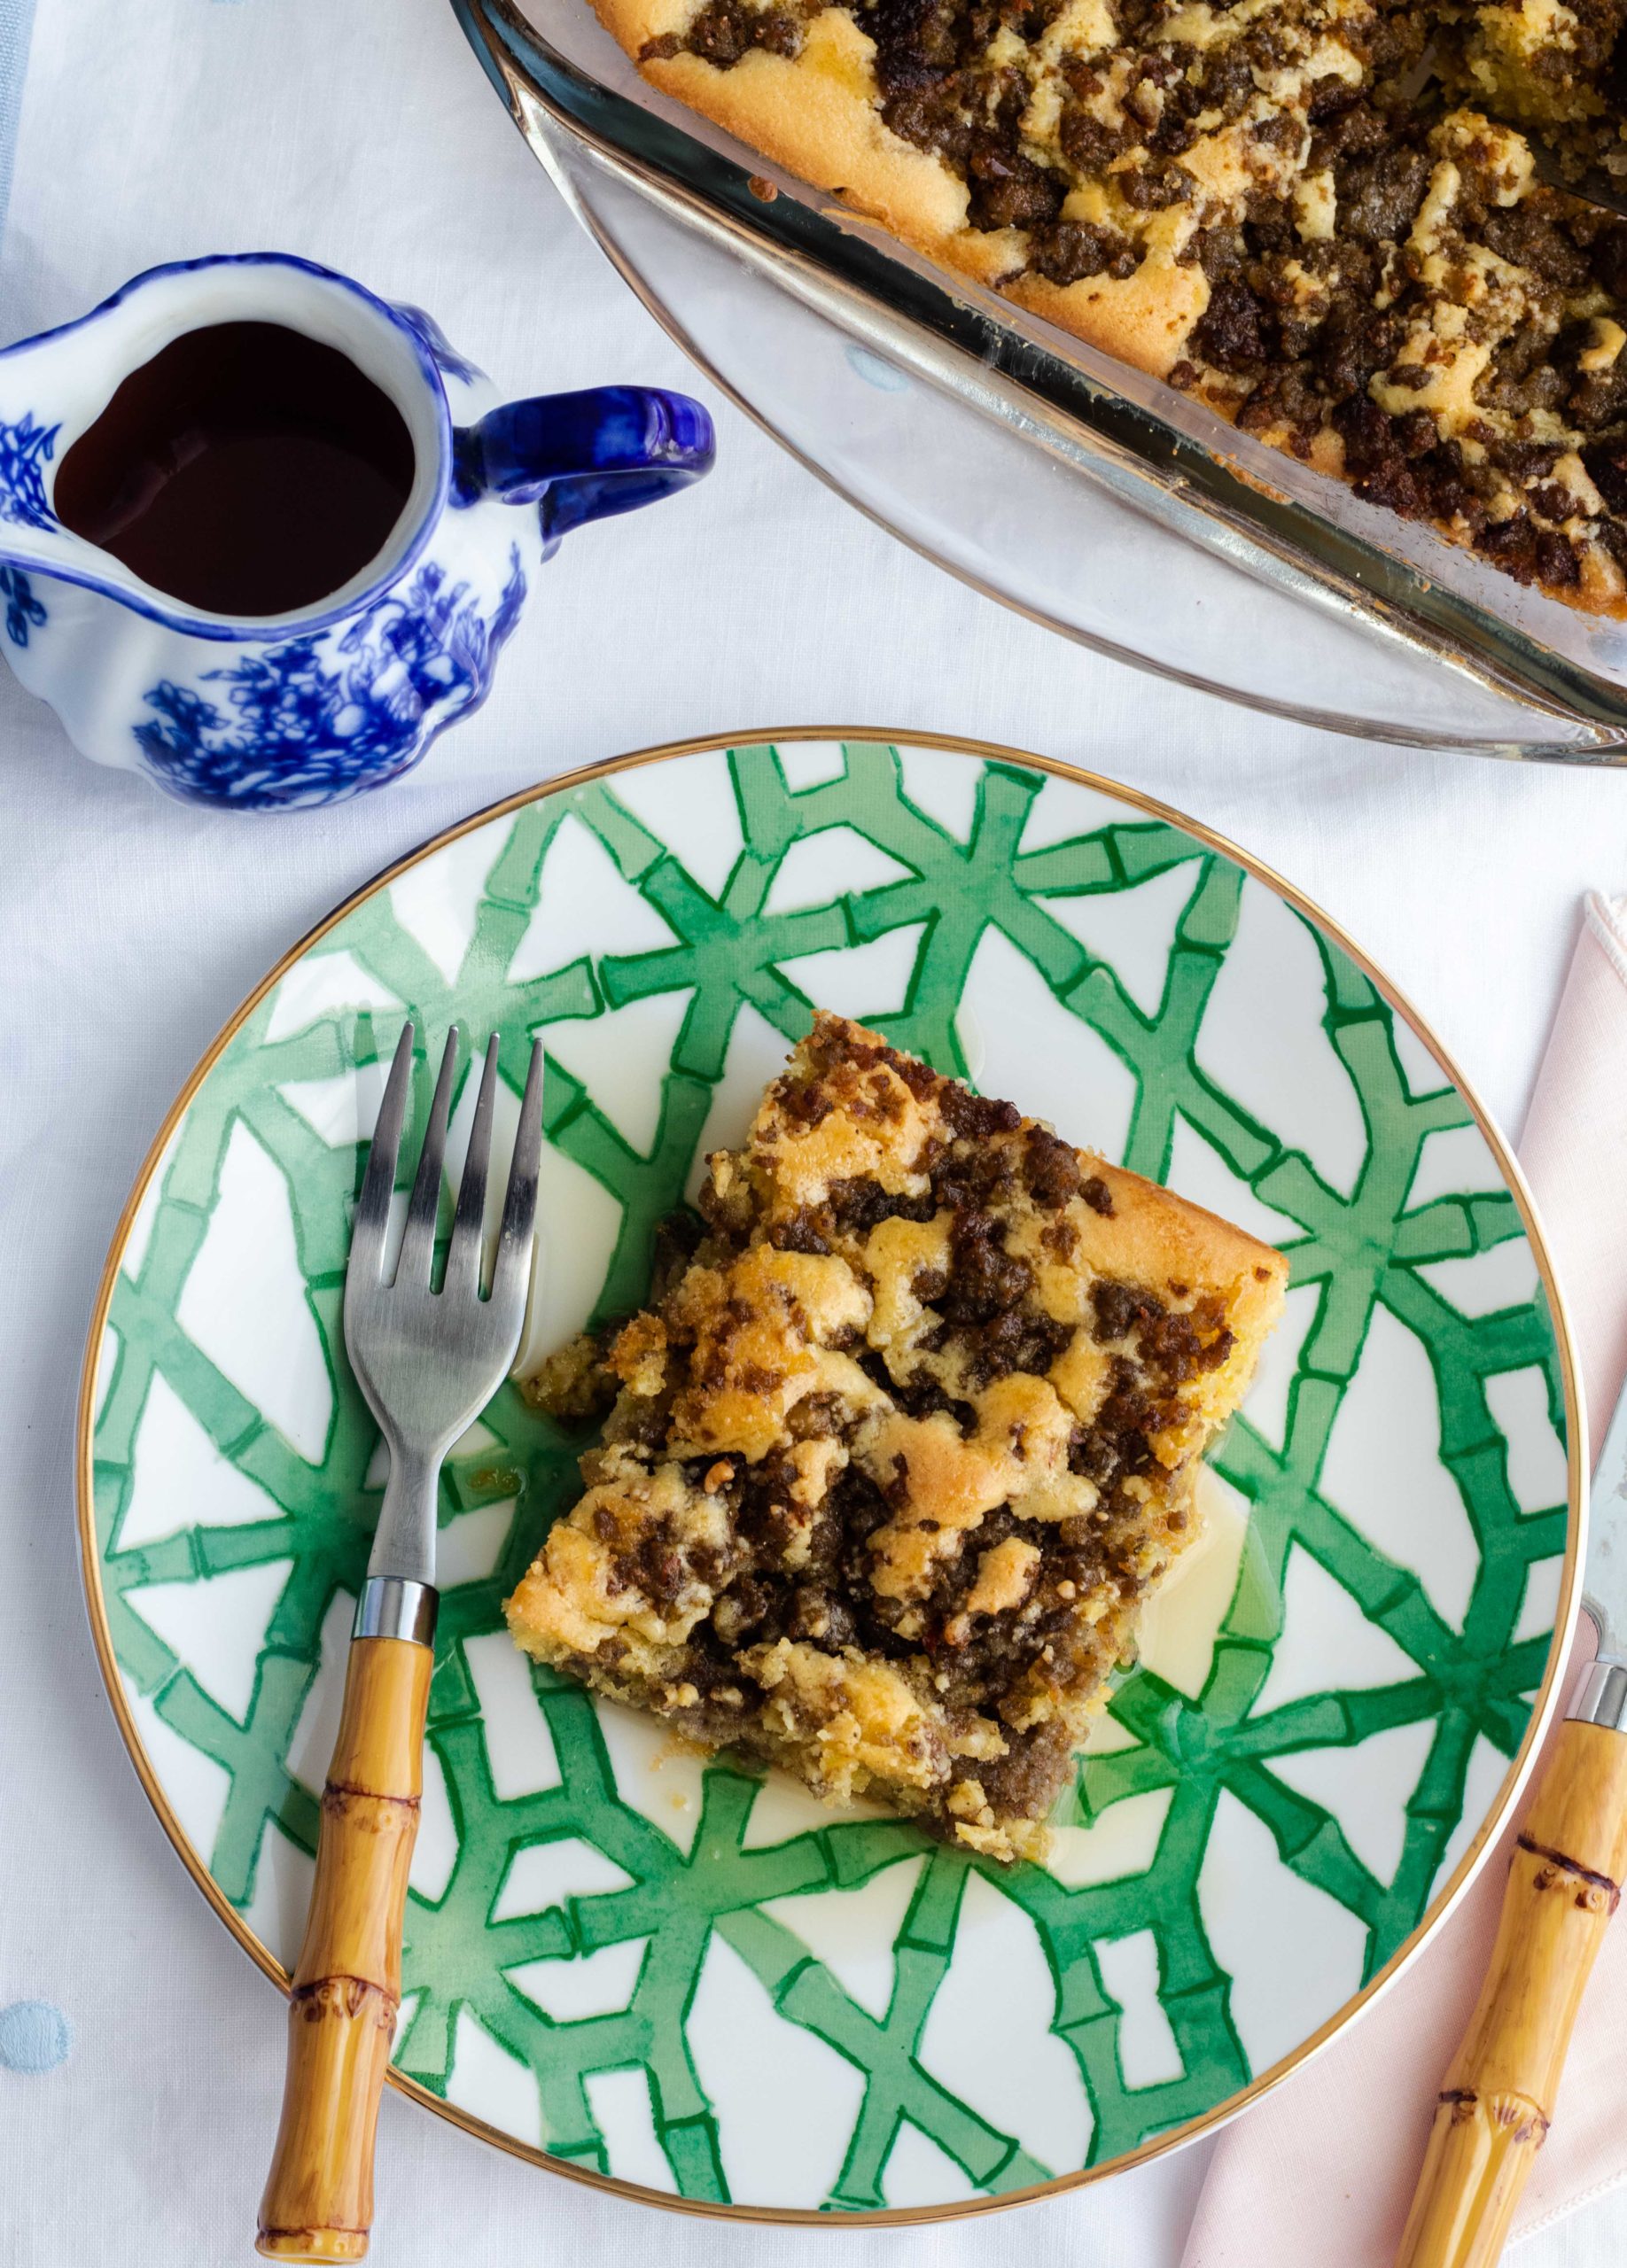 Low carb breakfast casserole on a plate with syrup.